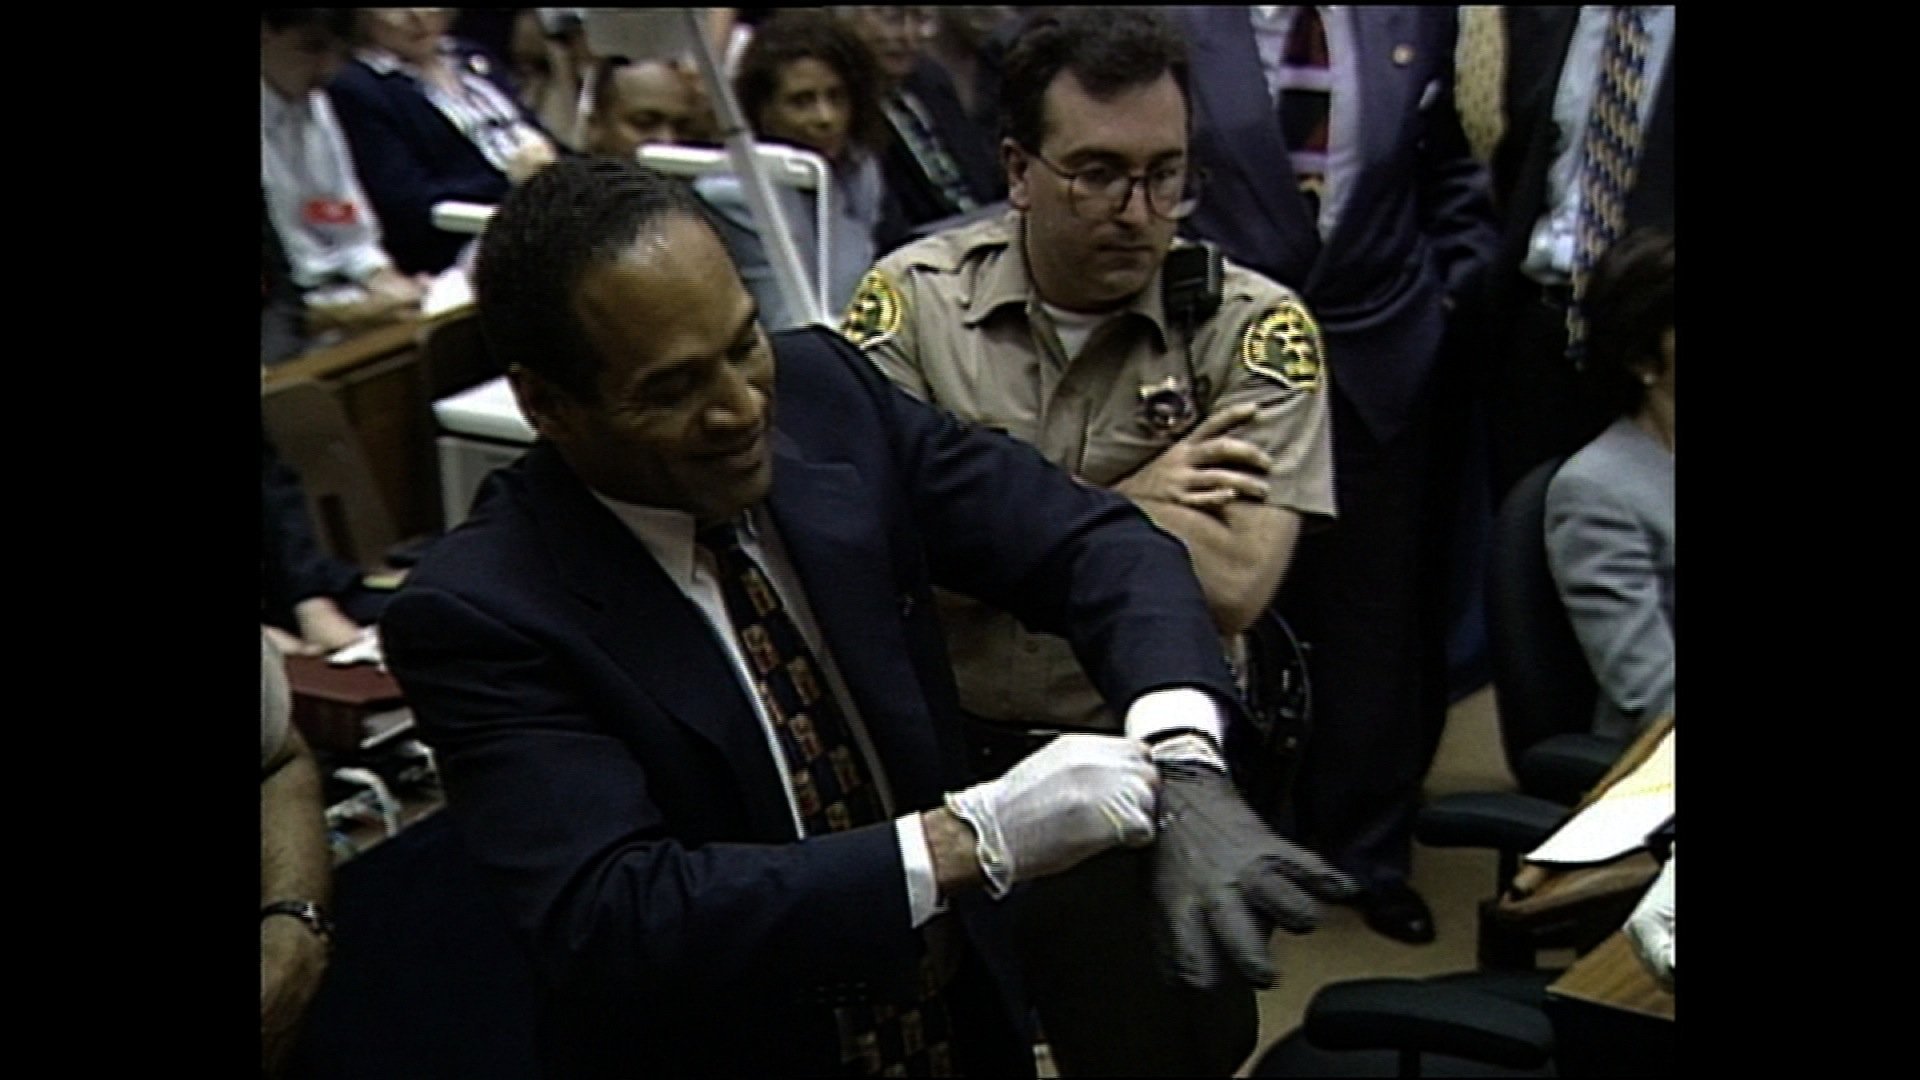 File- In 1995, O.J. Simpson went on trial for the killing of his ex-wife, Nicole Brown Simpson, and her friend Ronald Goldman, in what became a wall-to-wall televised proceeding. He is scheduled to appear before a parole board in Nevada on Thursday, July 20, 2017 for his hearing.